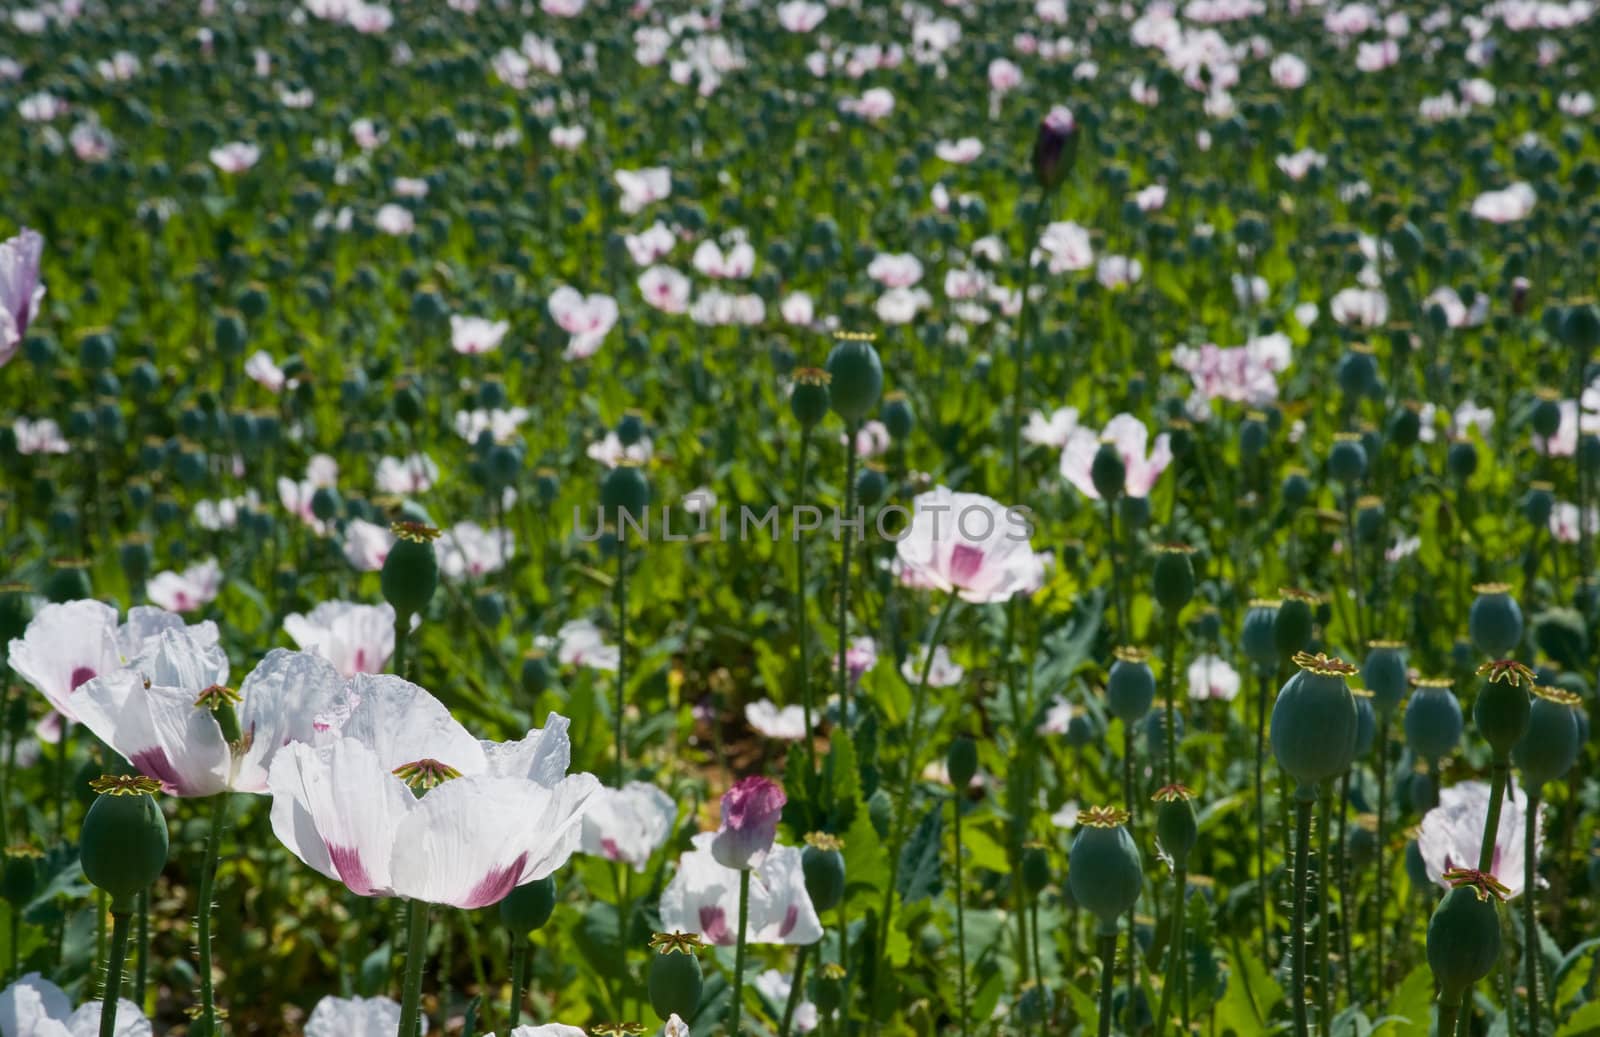 outdoor photo of a field of poppies